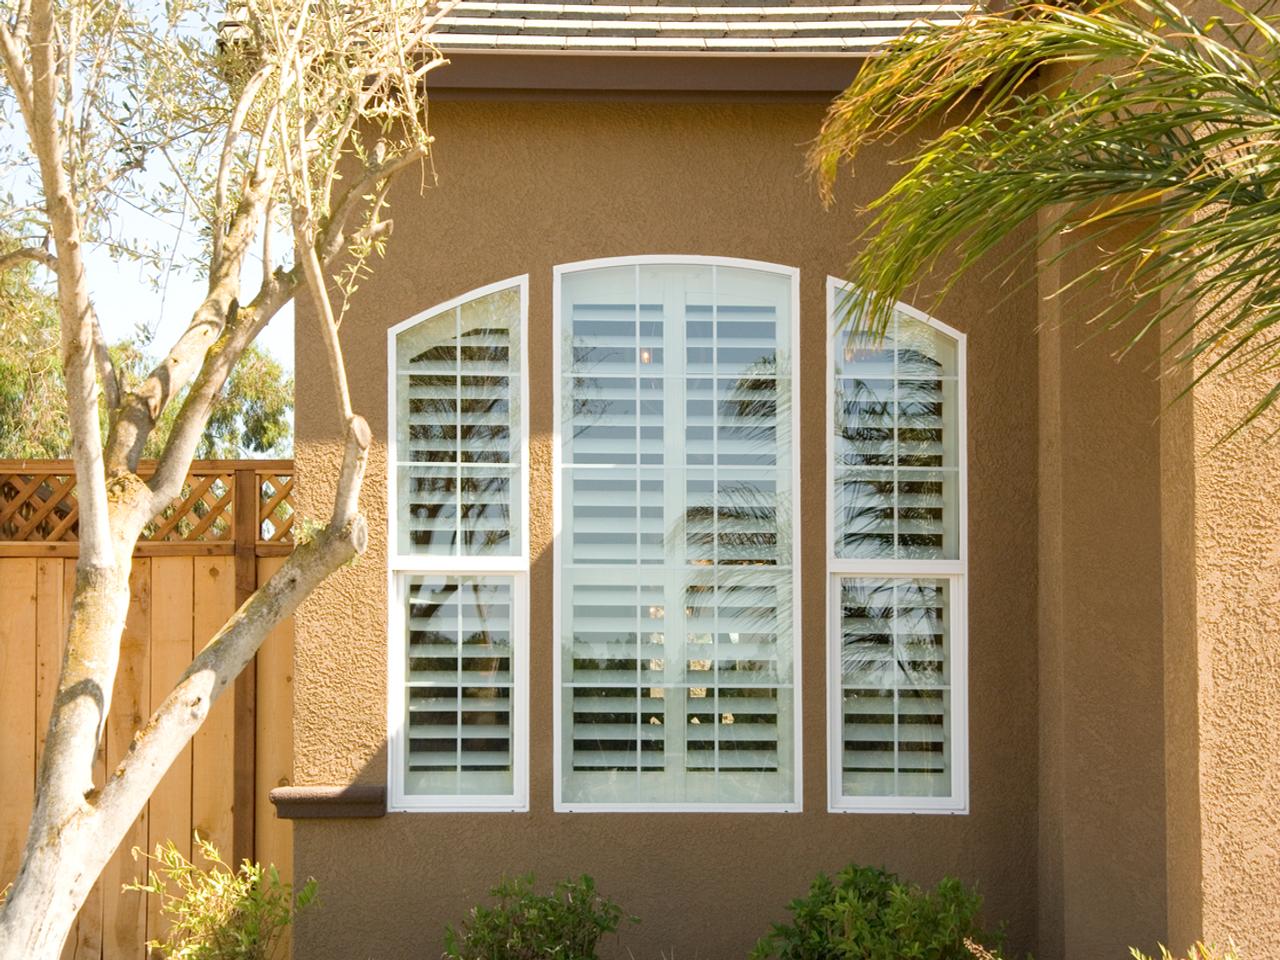 Exterior view of shutters on set of arched windows